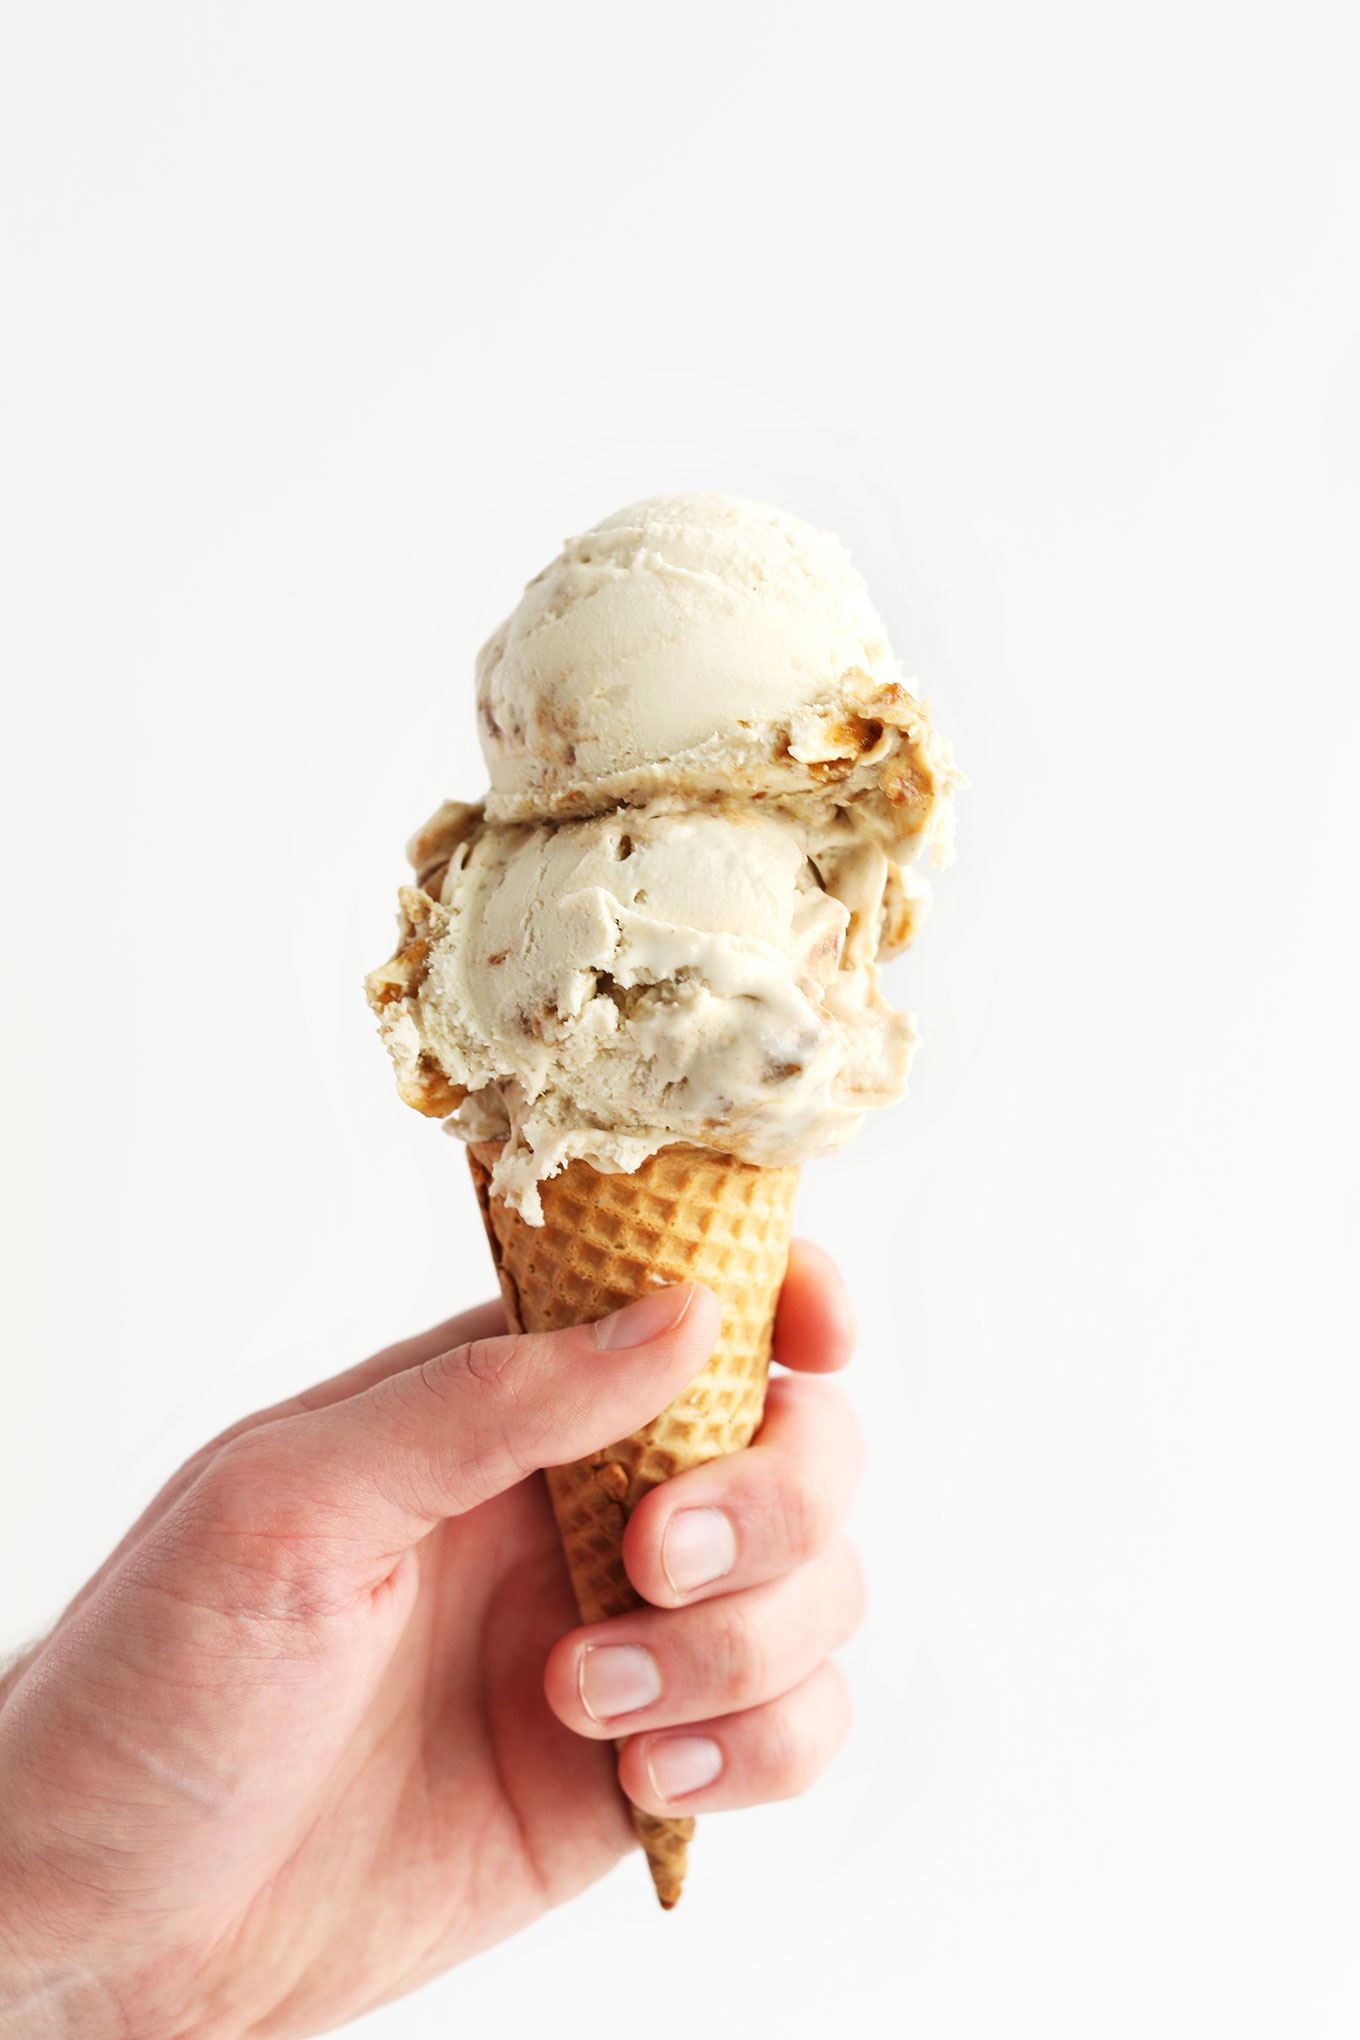 Holding up an ice cream cone topped with scoops of homemade Vegan Coconut Caramel Sea Salt Ice Cream